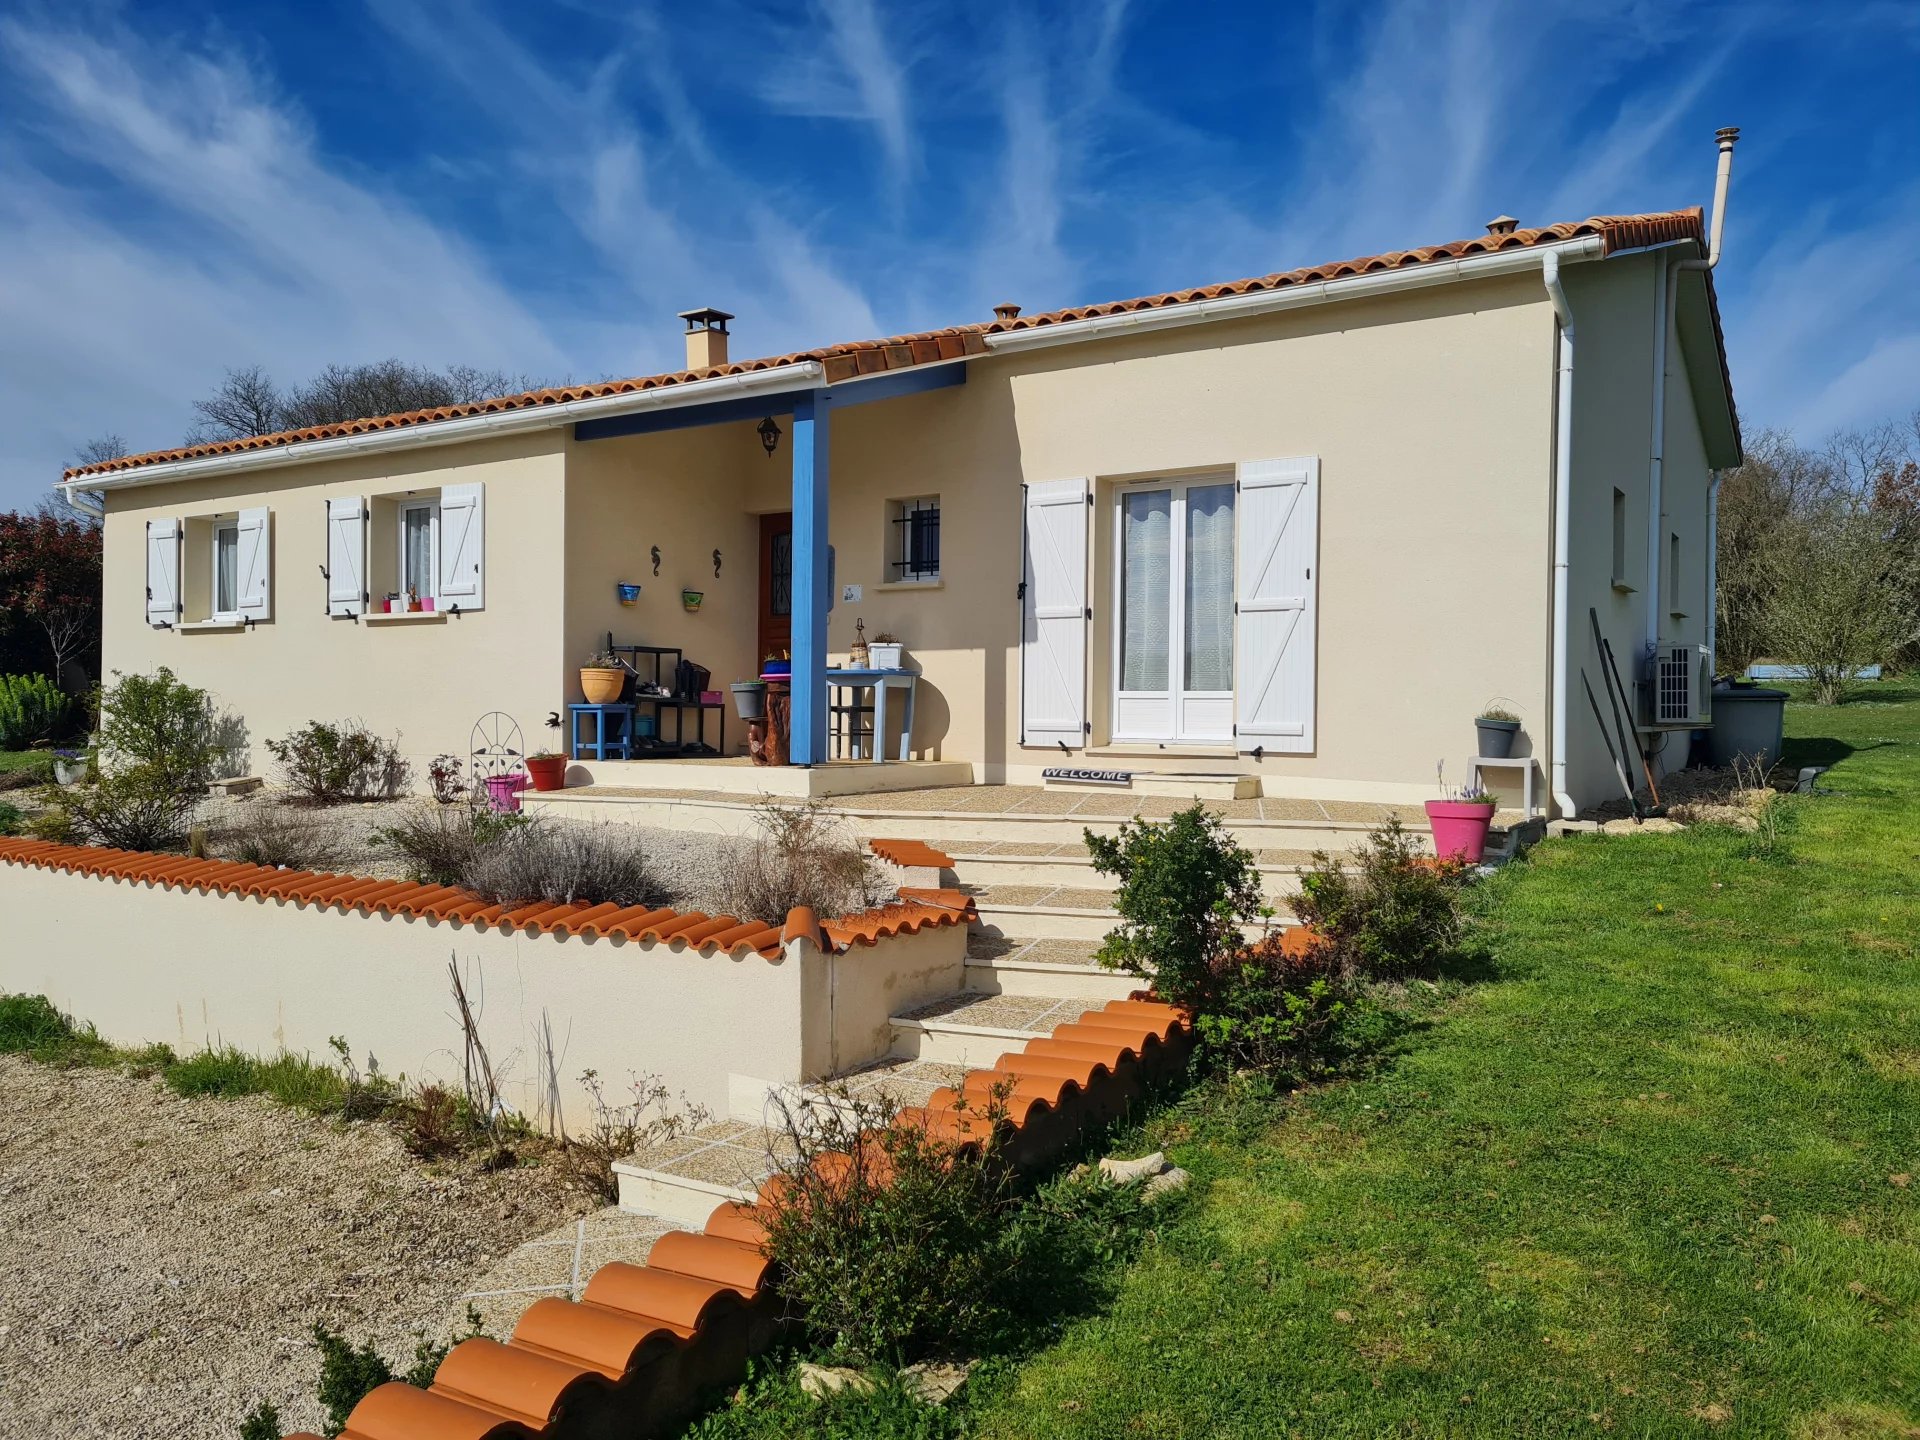 Immaculate four-bedroom house near Verteuil-sur-Charente